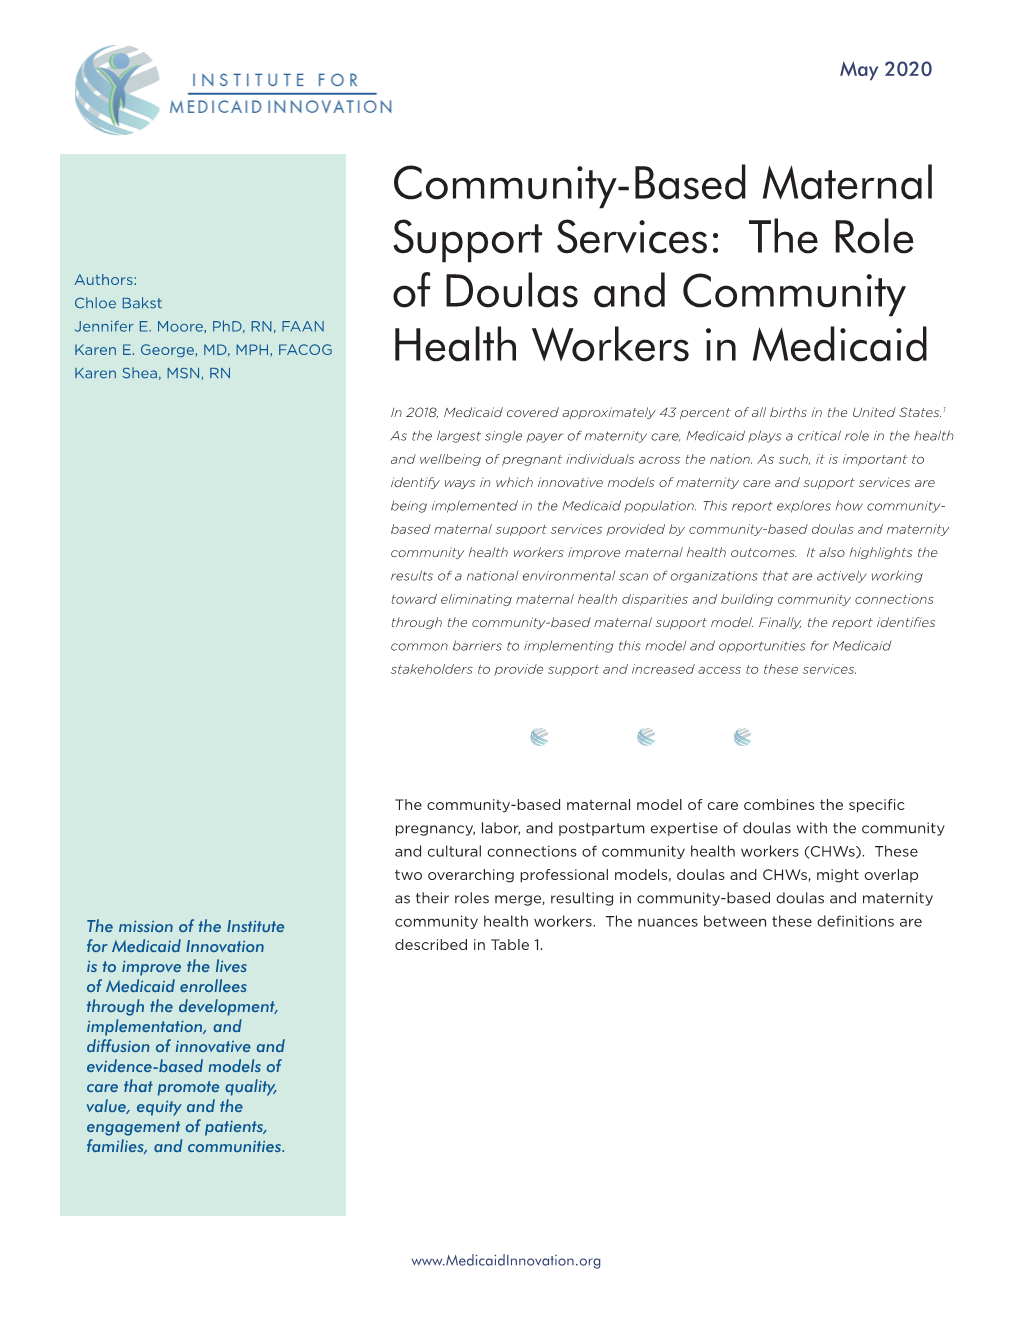 Community-Based Maternal Support Services: the Role of Doulas And